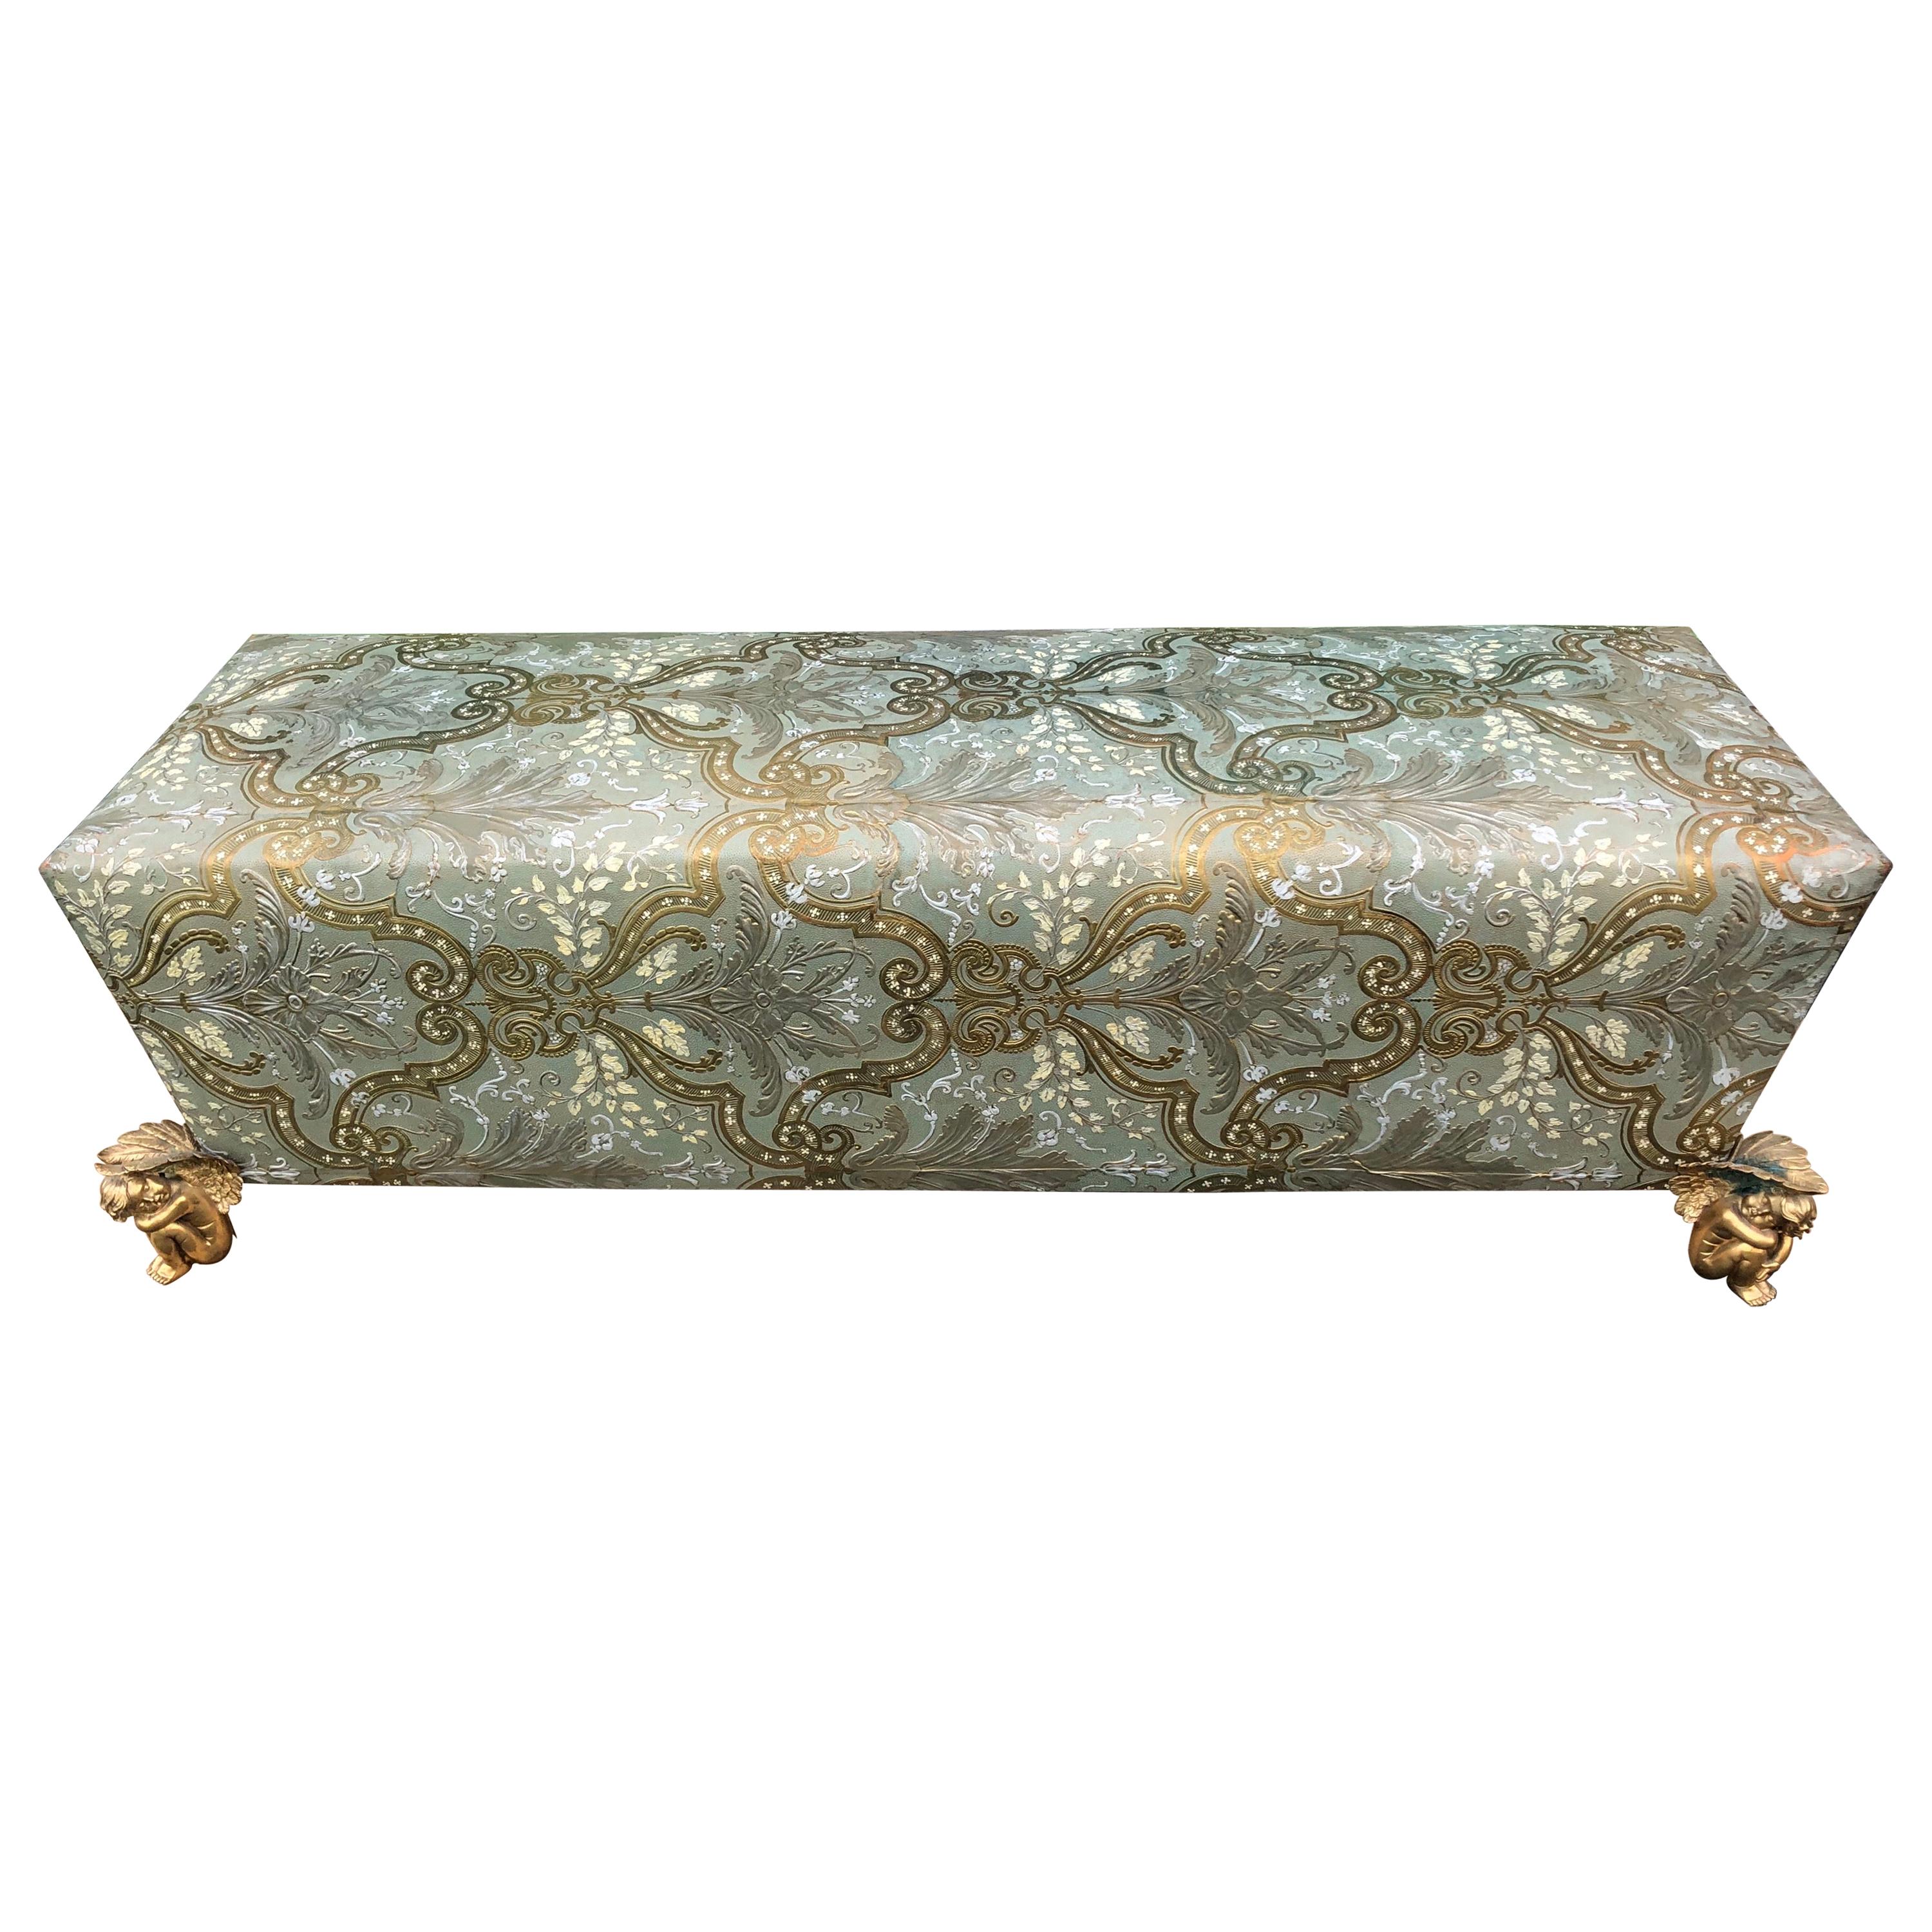 Muséum Bench Sofa by Maison Fey, Cordova Leather, Gilt Bronze Winged Putto Feet For Sale